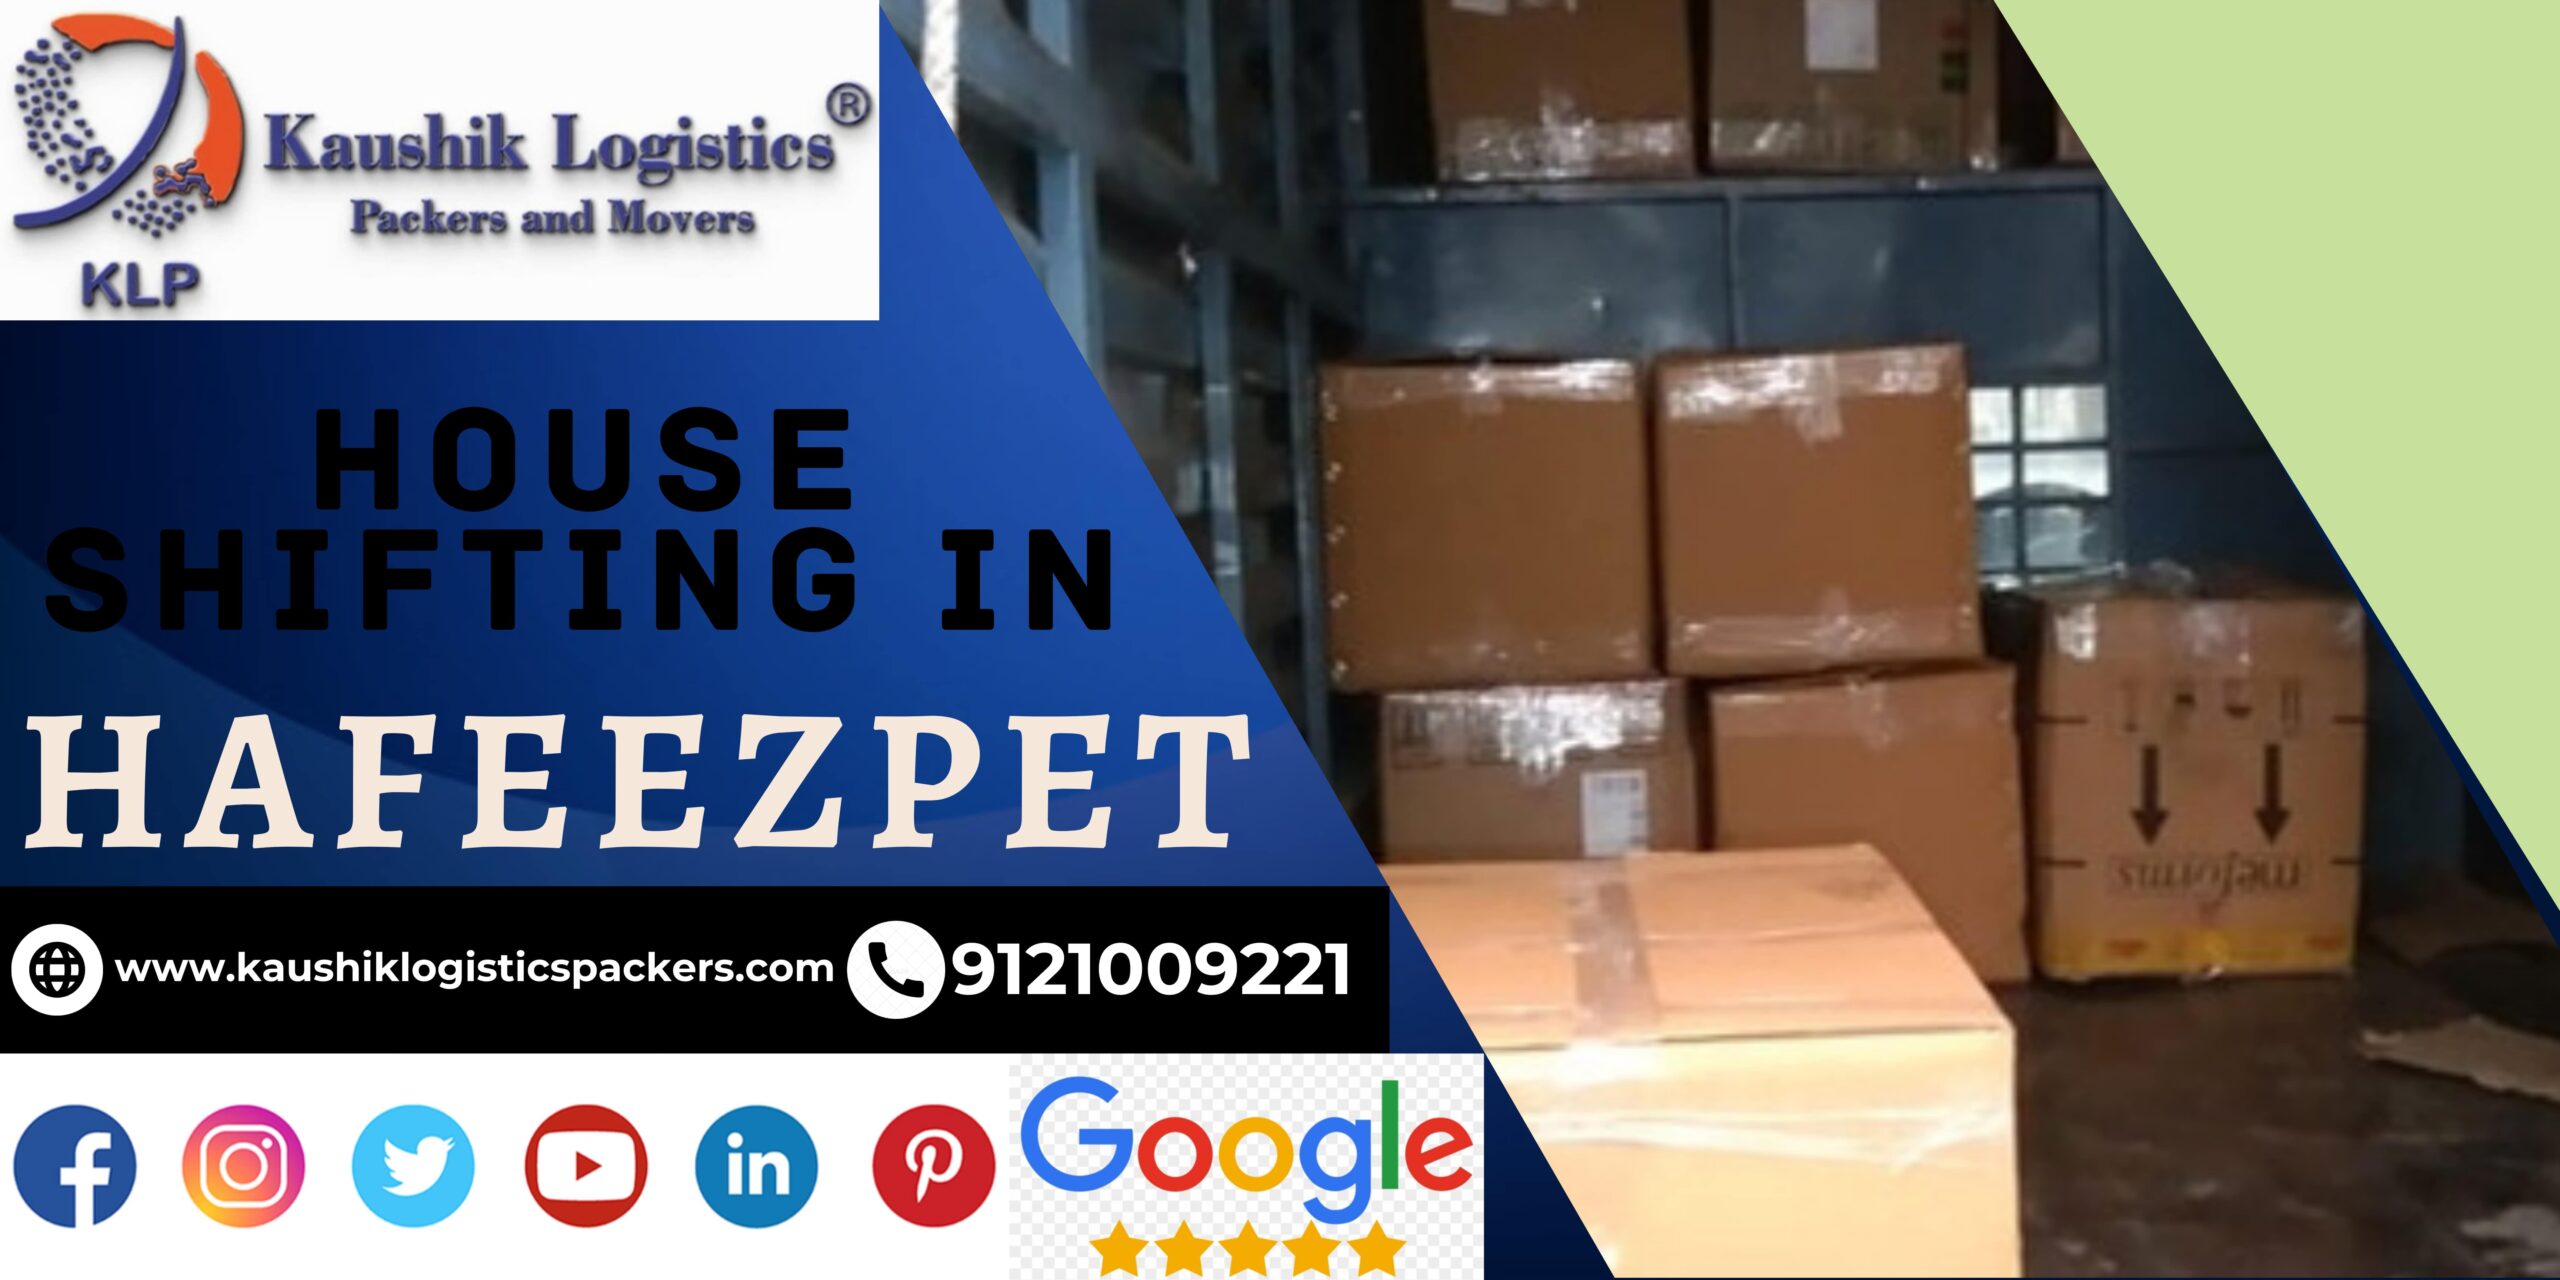 Packers and Movers In Hafeezpet